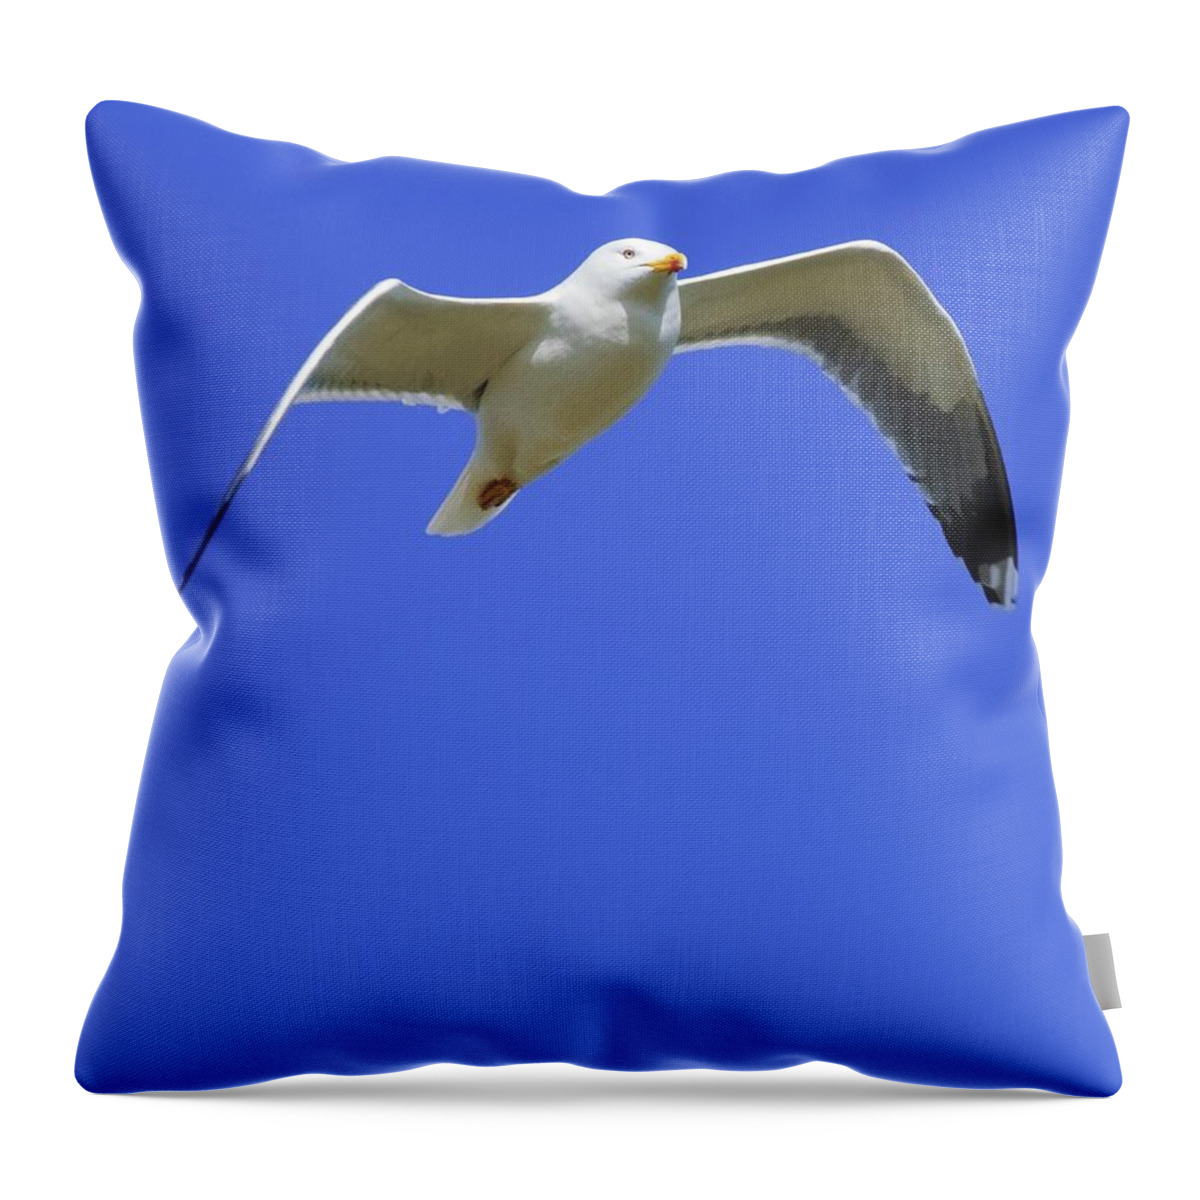 1 Animal Only Throw Pillow featuring the photograph Seagull In Flight by Ben Welsh